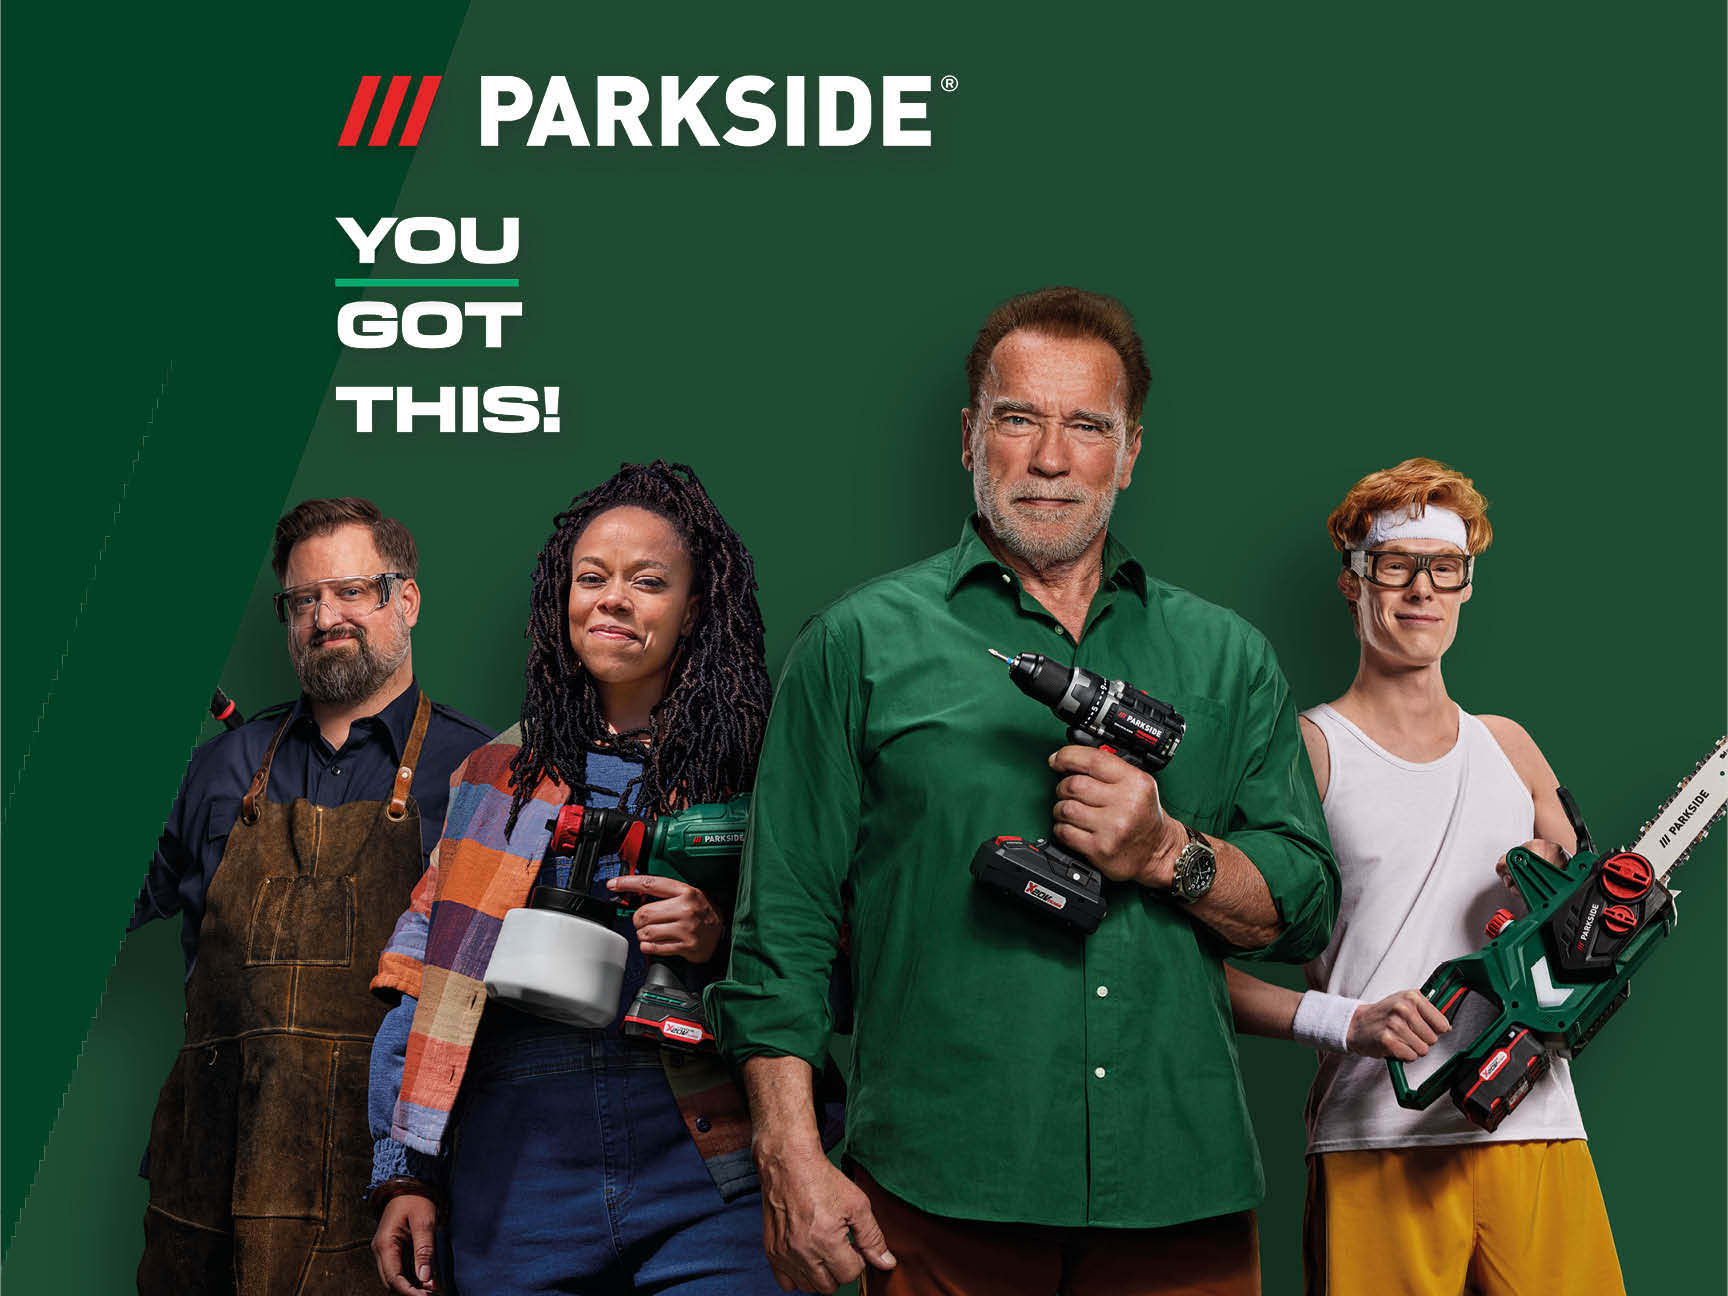 PARKSIDE®: You got this